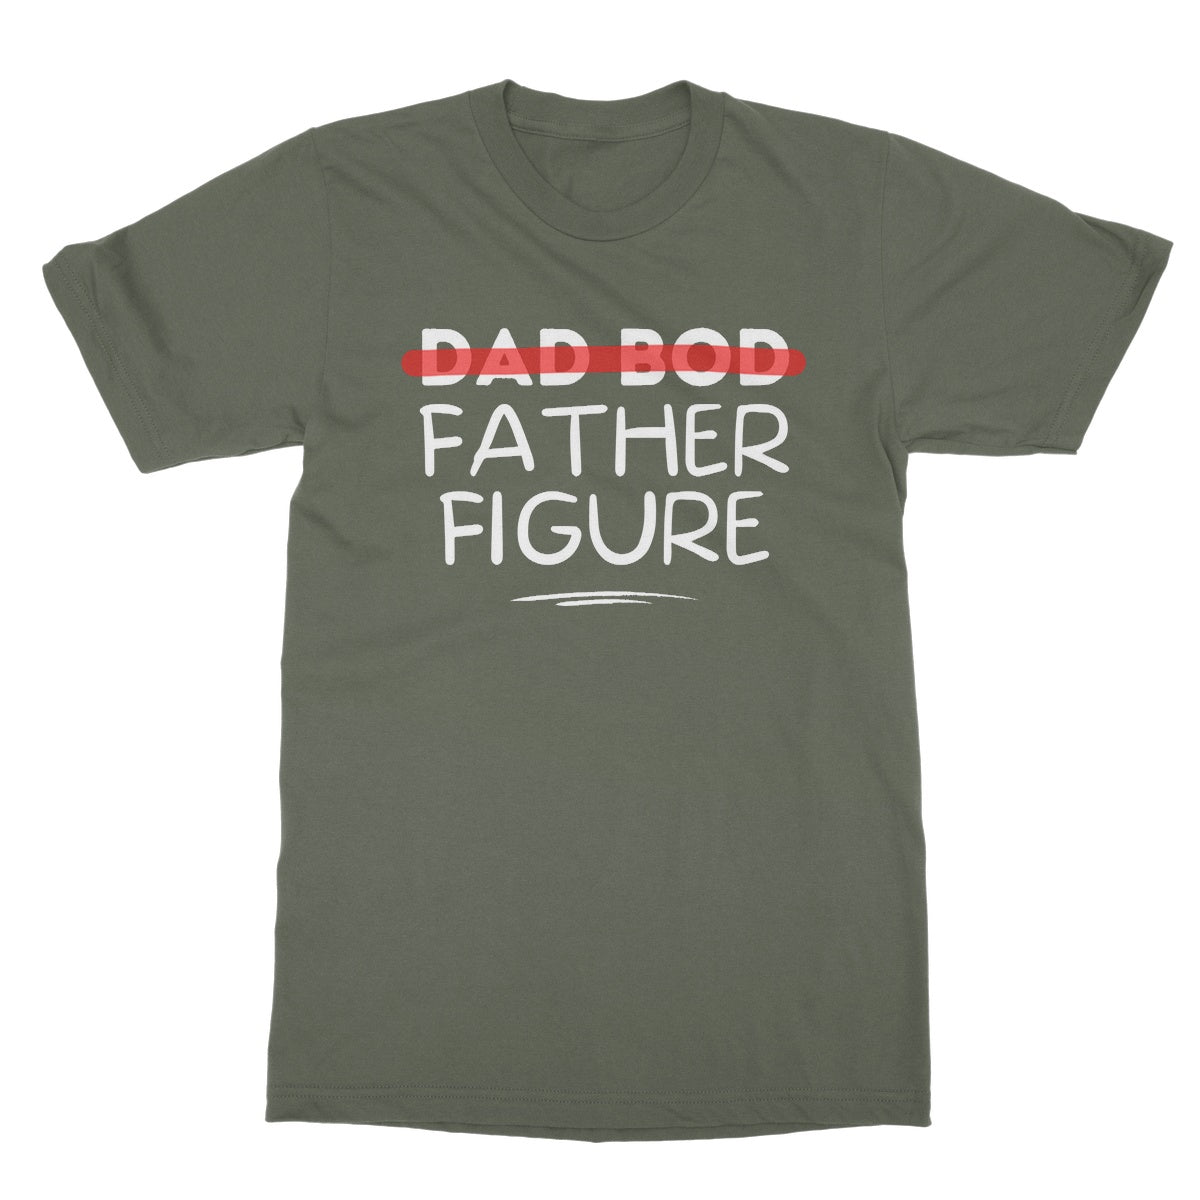 dad bod father figure t shirt green